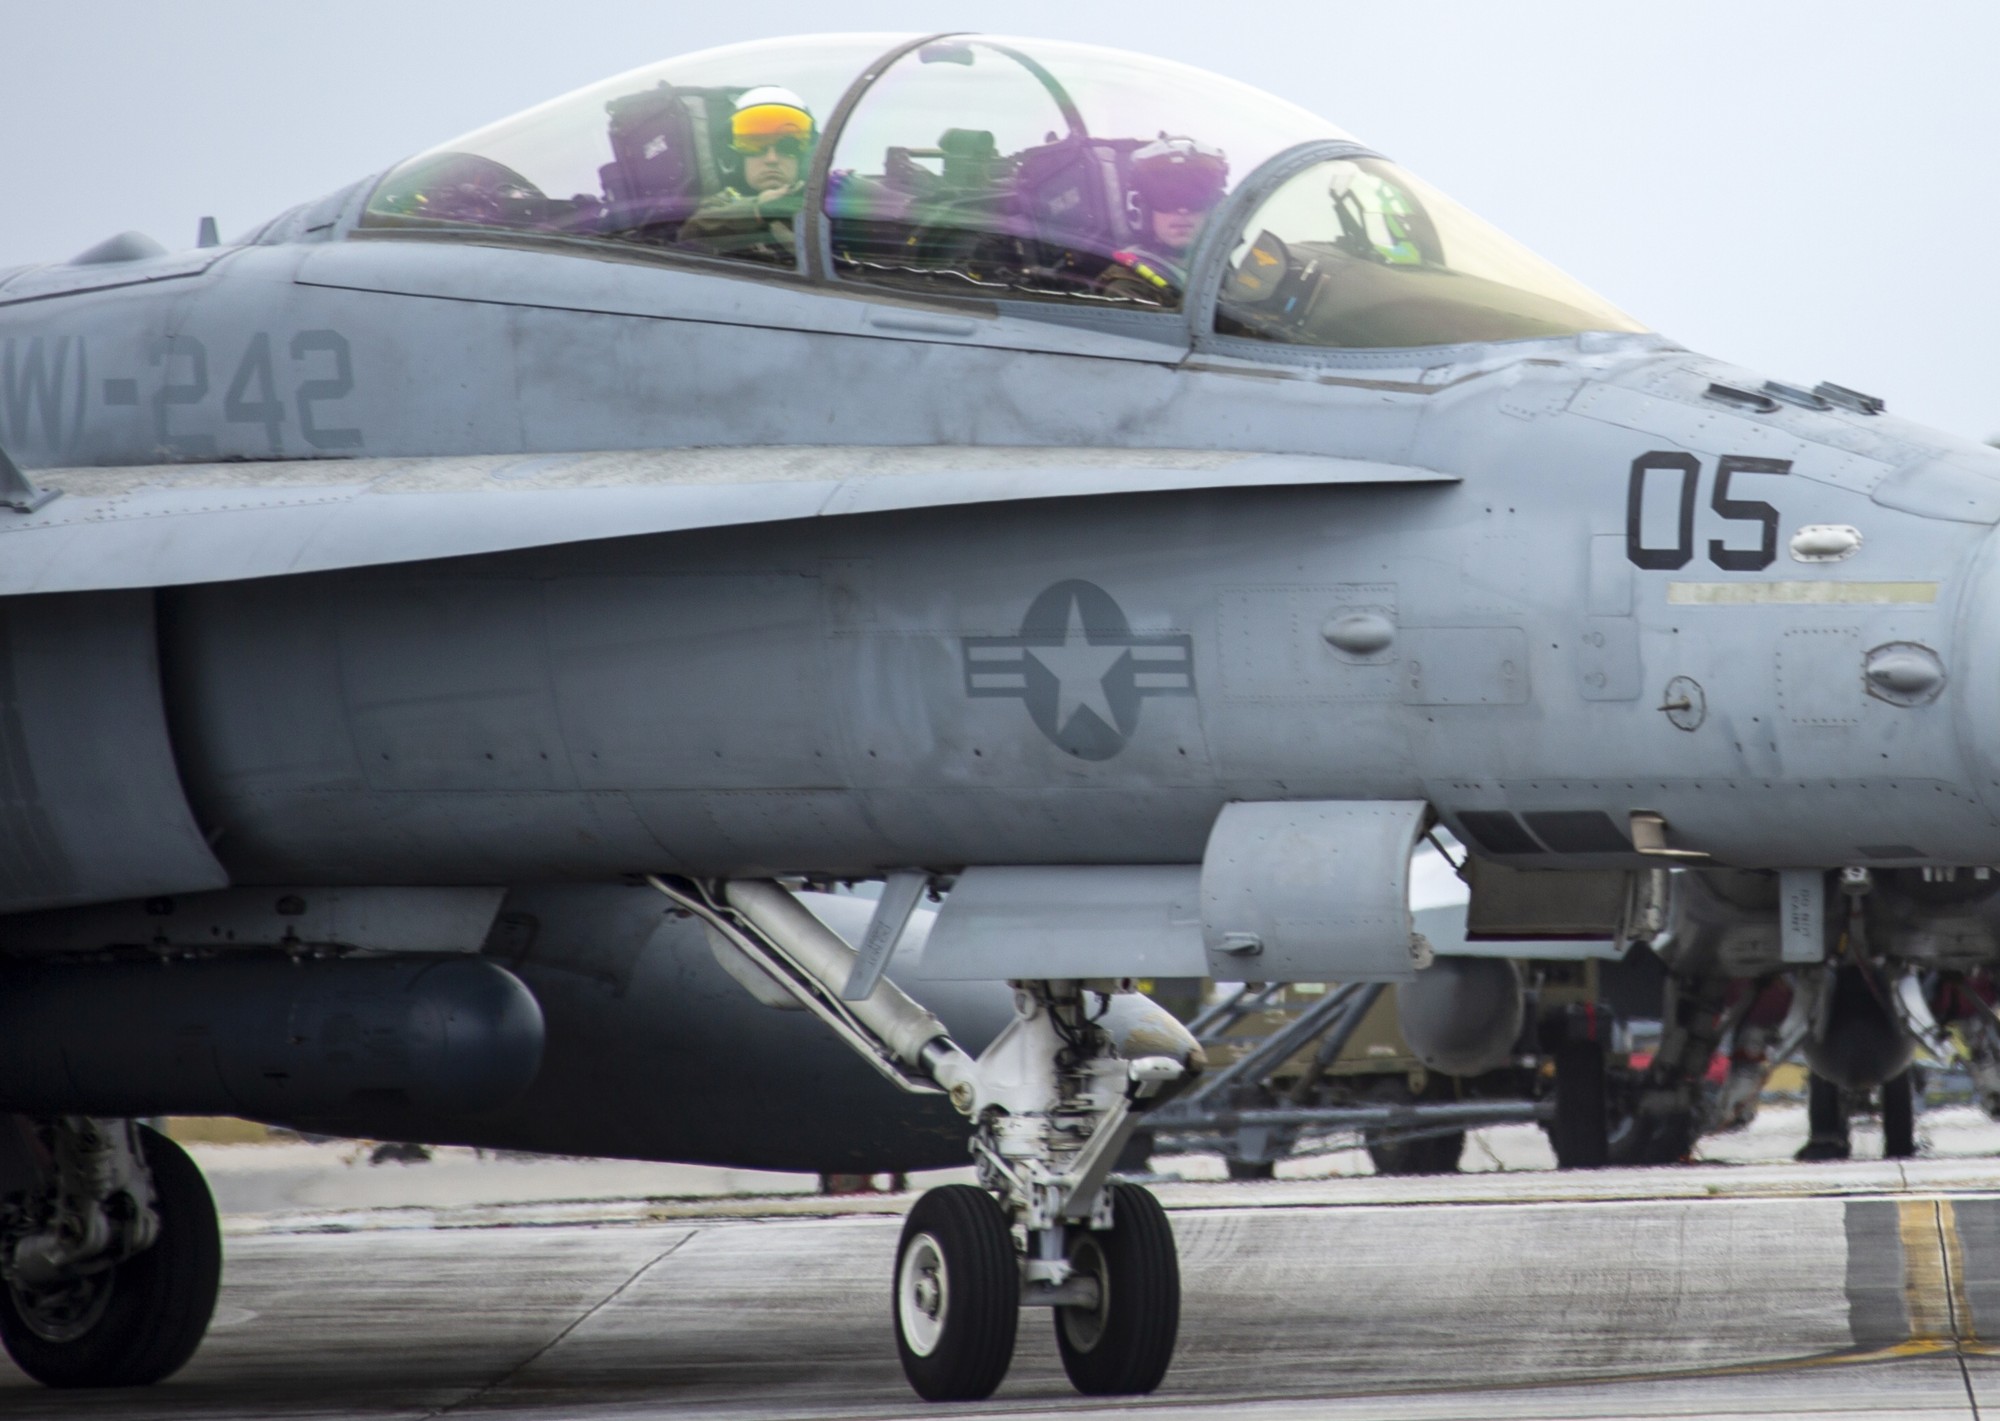 vmfa(aw)-242 bats marine all-weather fighter attack squadron usmc f/a-18d hornet 93